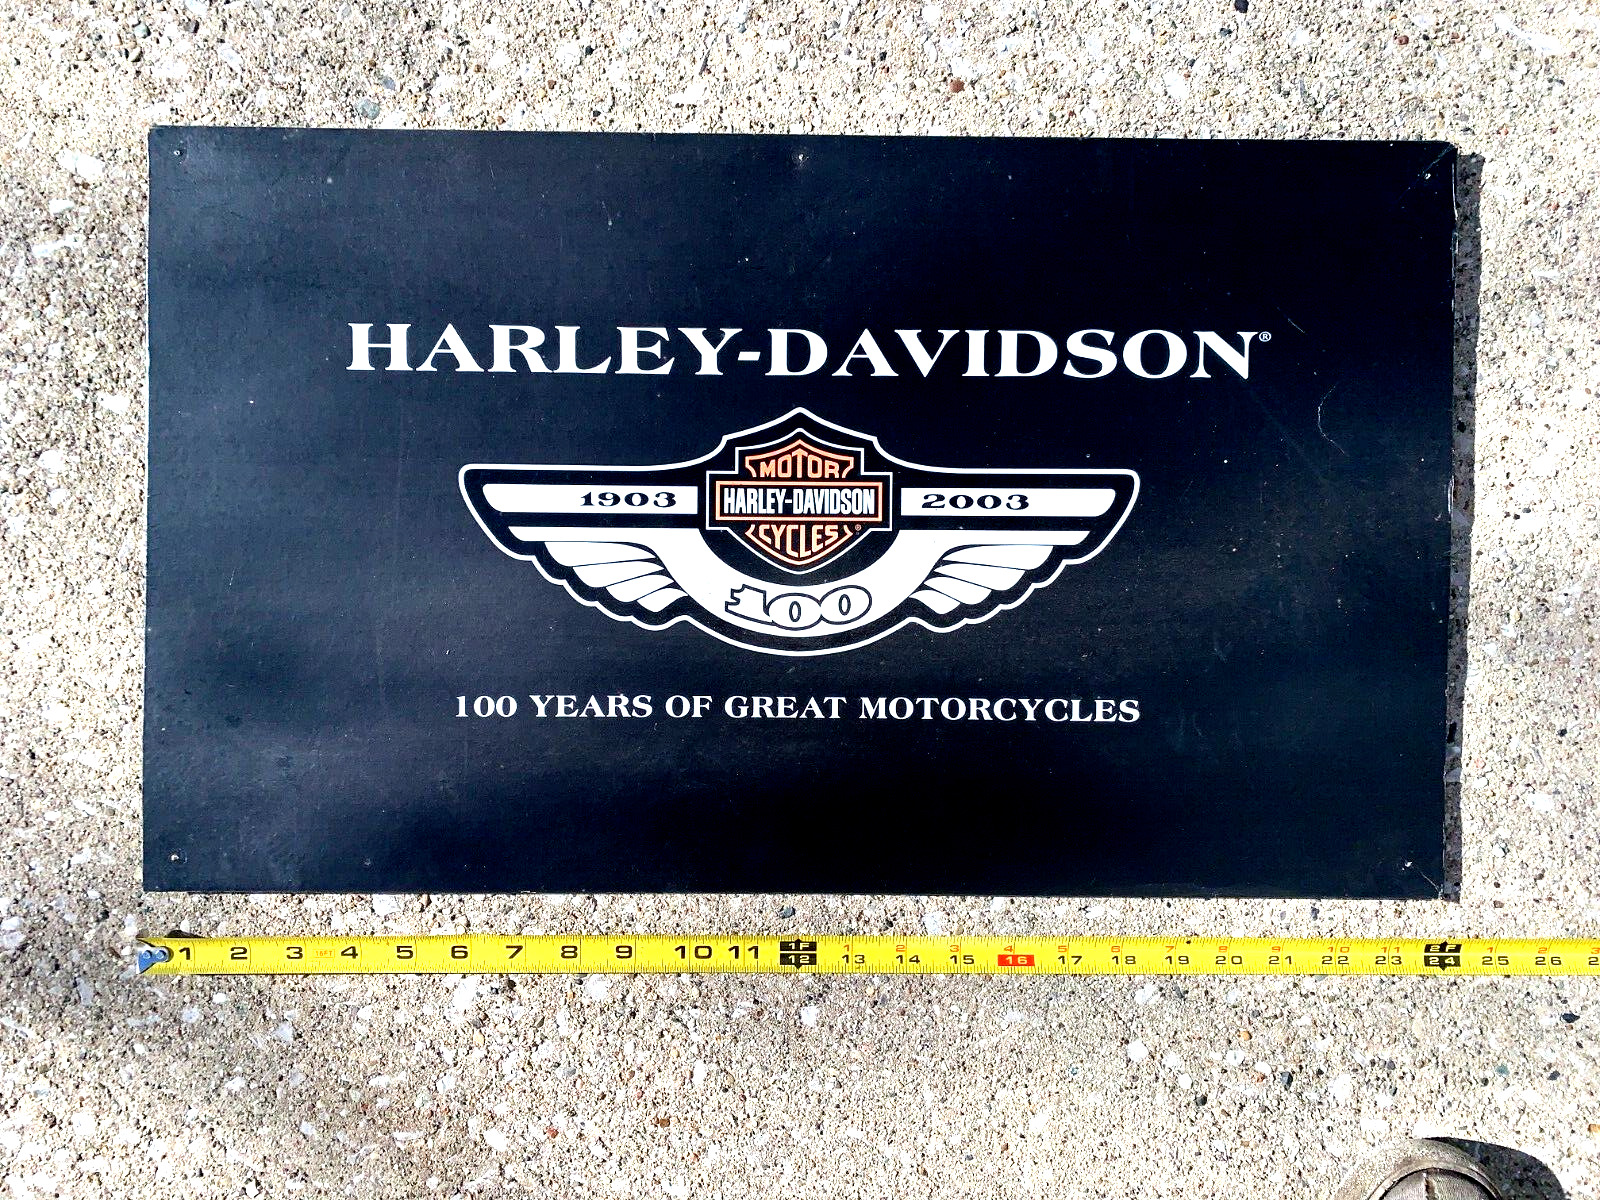 HARLEY DAVIDSON 100 YEARS MOTORCYCLES USED AS A POSTER ON THE WALL BOX TOP